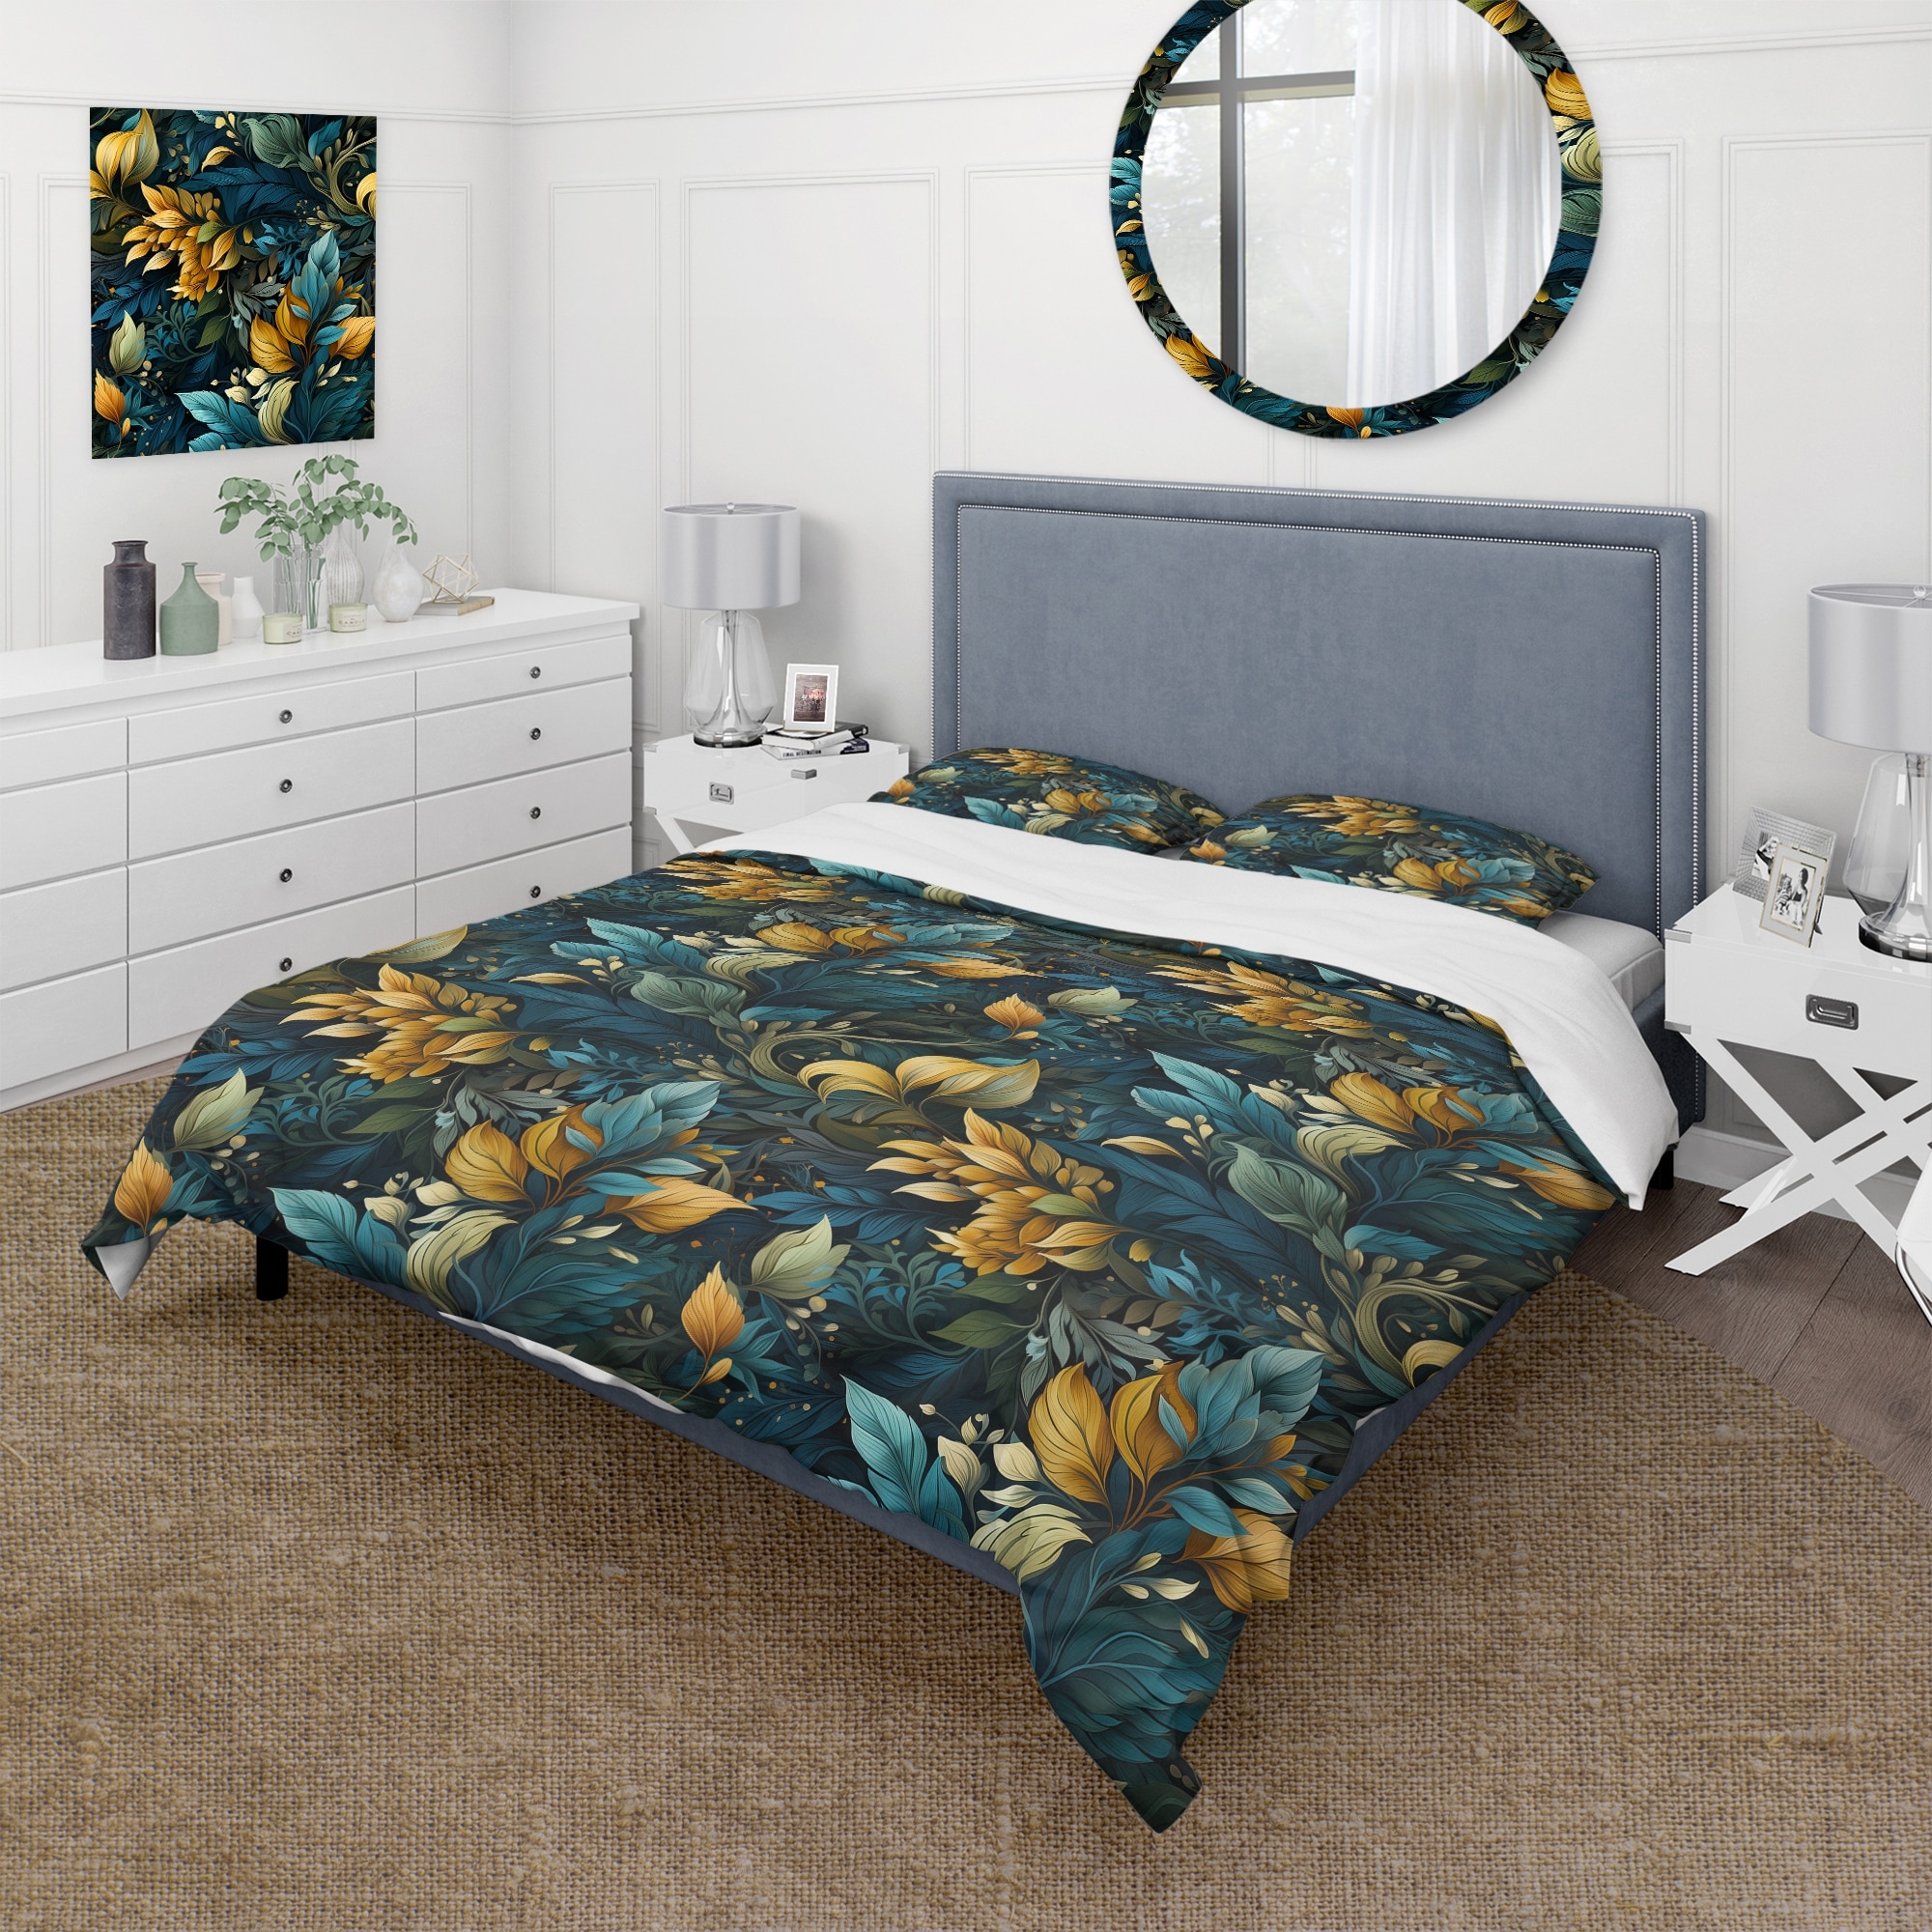 Cozy Line Home Fashions Turquoise Blue Coral Floral Leaf Reversible Quilt  Bedding Set, Coverlet Bedspread Lightweight for All Seasons (Mirage  Paisley